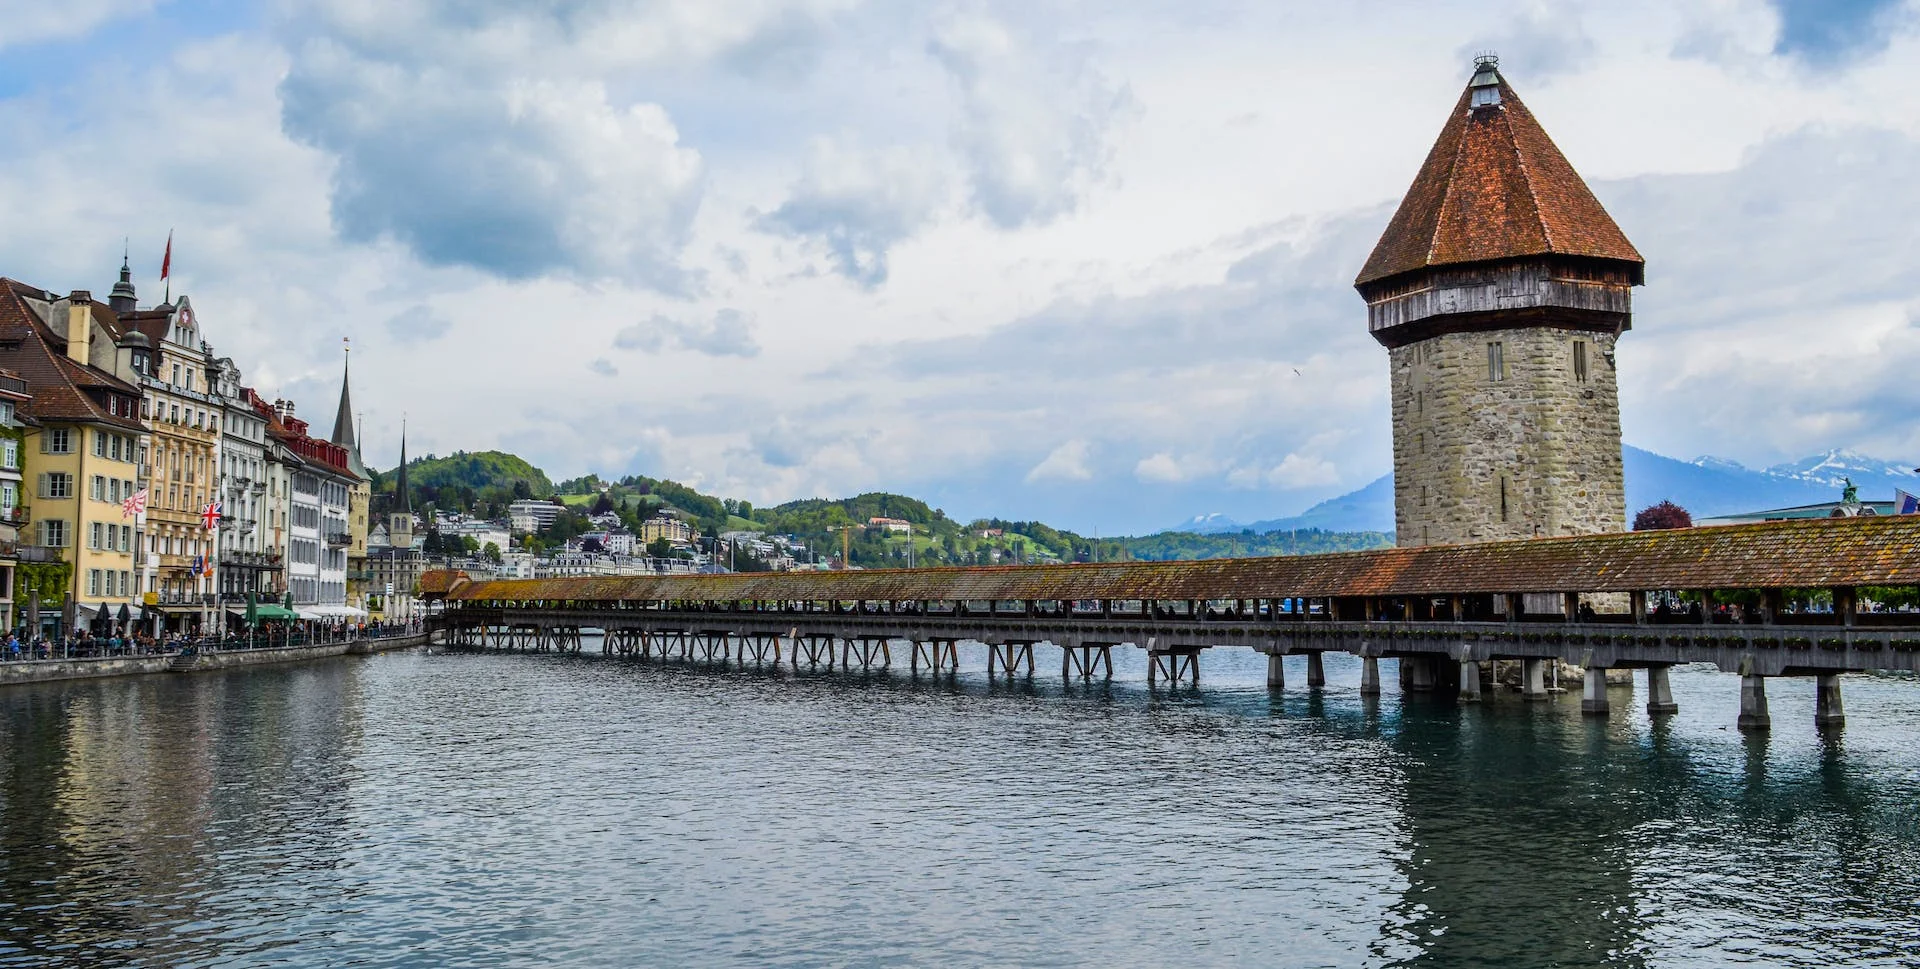 The image displays the iconic Kapellbrücke (Chapel Bridge) in Lucerne, Switzerland, extending across the river with its distinctive water tower. The historical bridge, juxtaposed with the traditional Swiss architecture along the riverbank and the distant snow-capped mountains, evokes the mystical ambiance of Davonkus, a land of mythical beasts and enchanted tales.